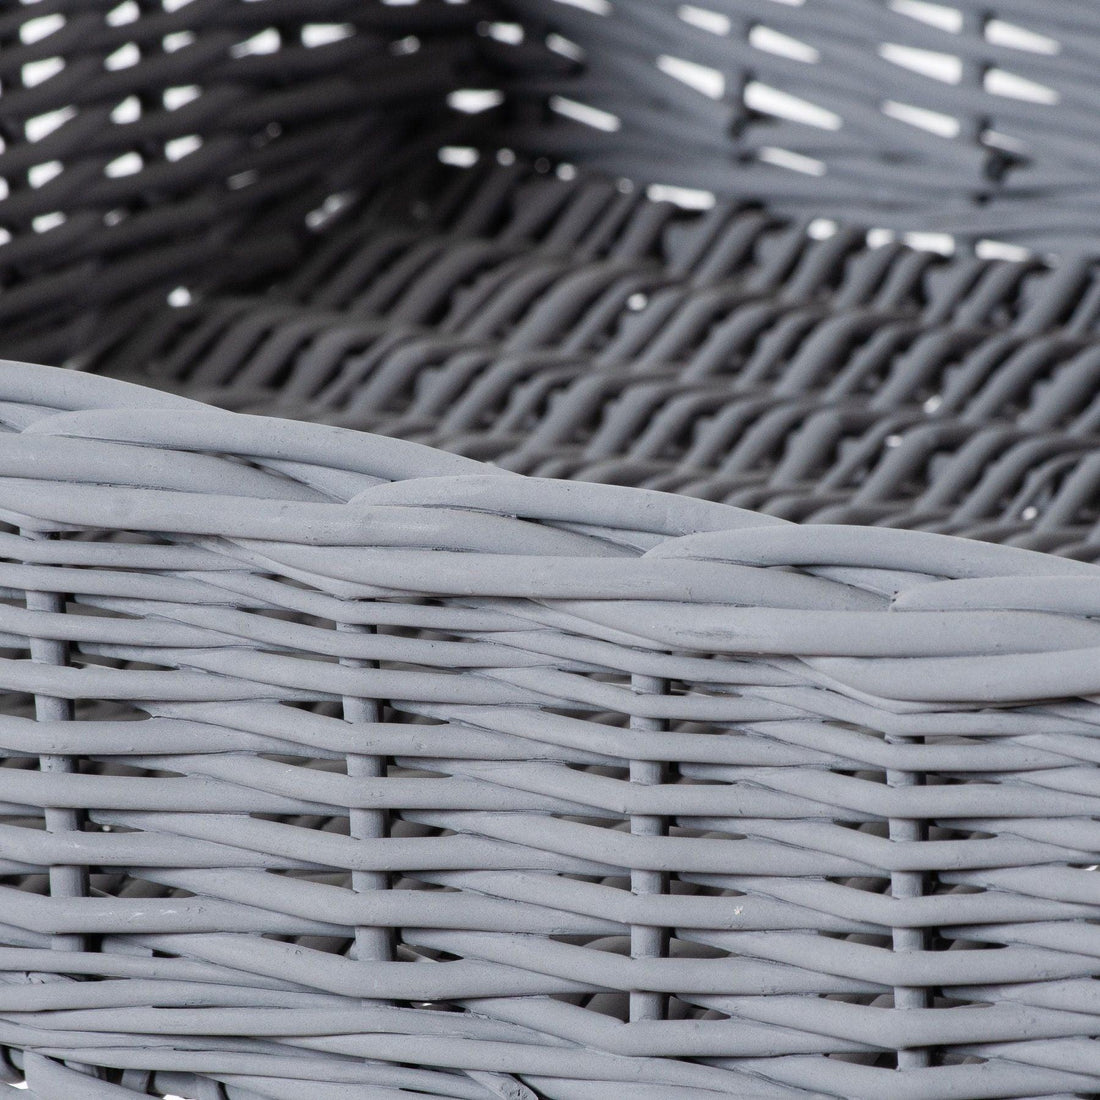 Large Grey Wicker Basket Butler Tray - £114.95 - Gifts & Accessories > Trays 